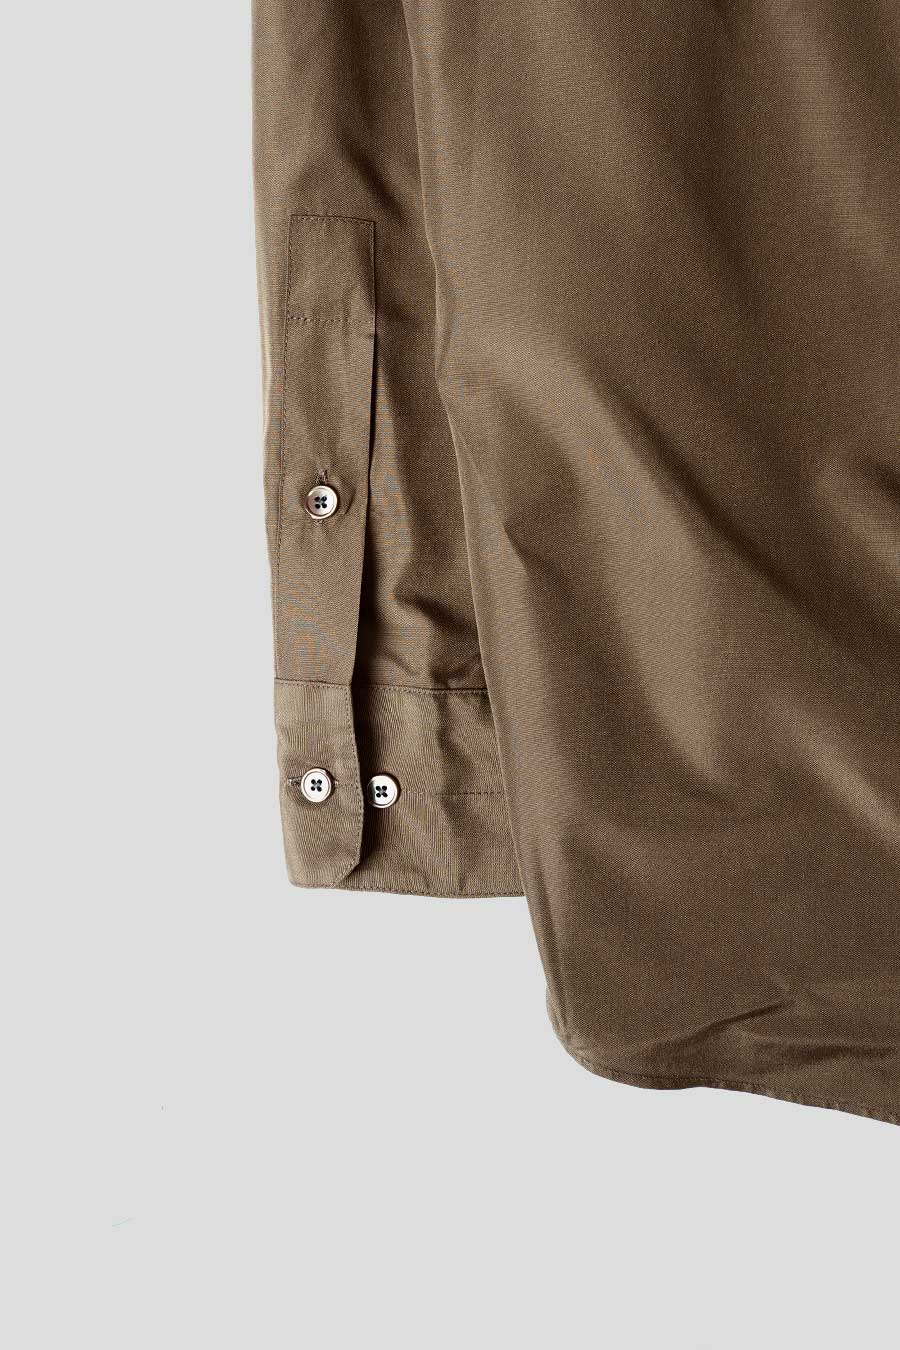 LEMAIRE - DARK TOBACCO RELAXED SHIRT